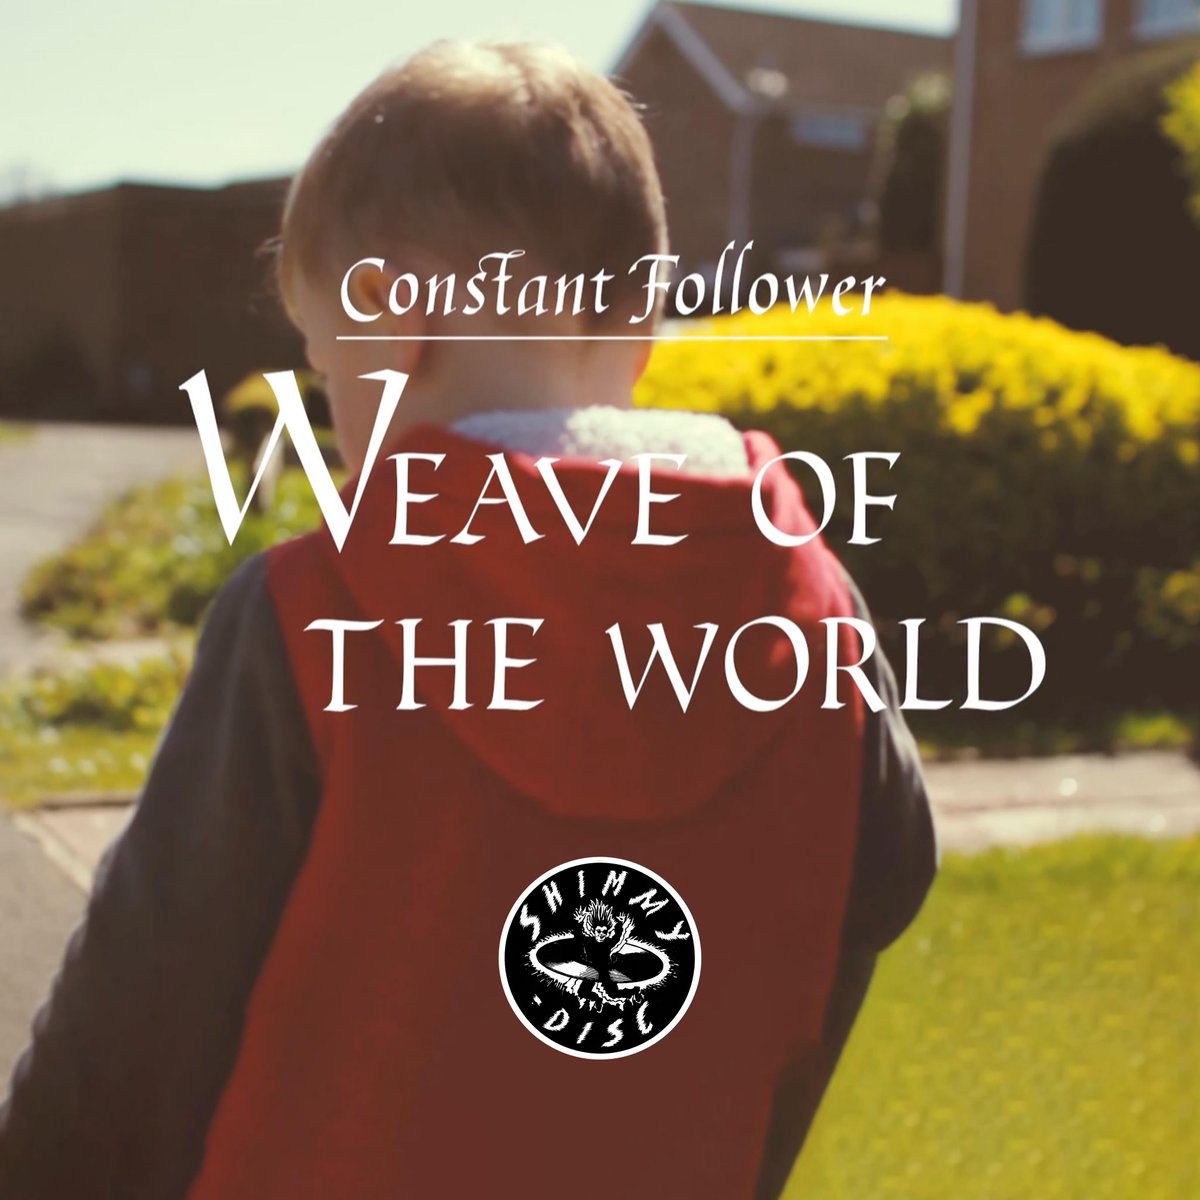 🥳 Our new single 'Weave of the World' is out everywhere now! 

Have a listen and let us know what you think! smarturl.it/CFWeave

Thanks @Quitter_k @marktranmer @HelpMusiciansUK @SceneStirling @CreativeScots @widedays #newsinglealert @JoyfulNoiseRecs